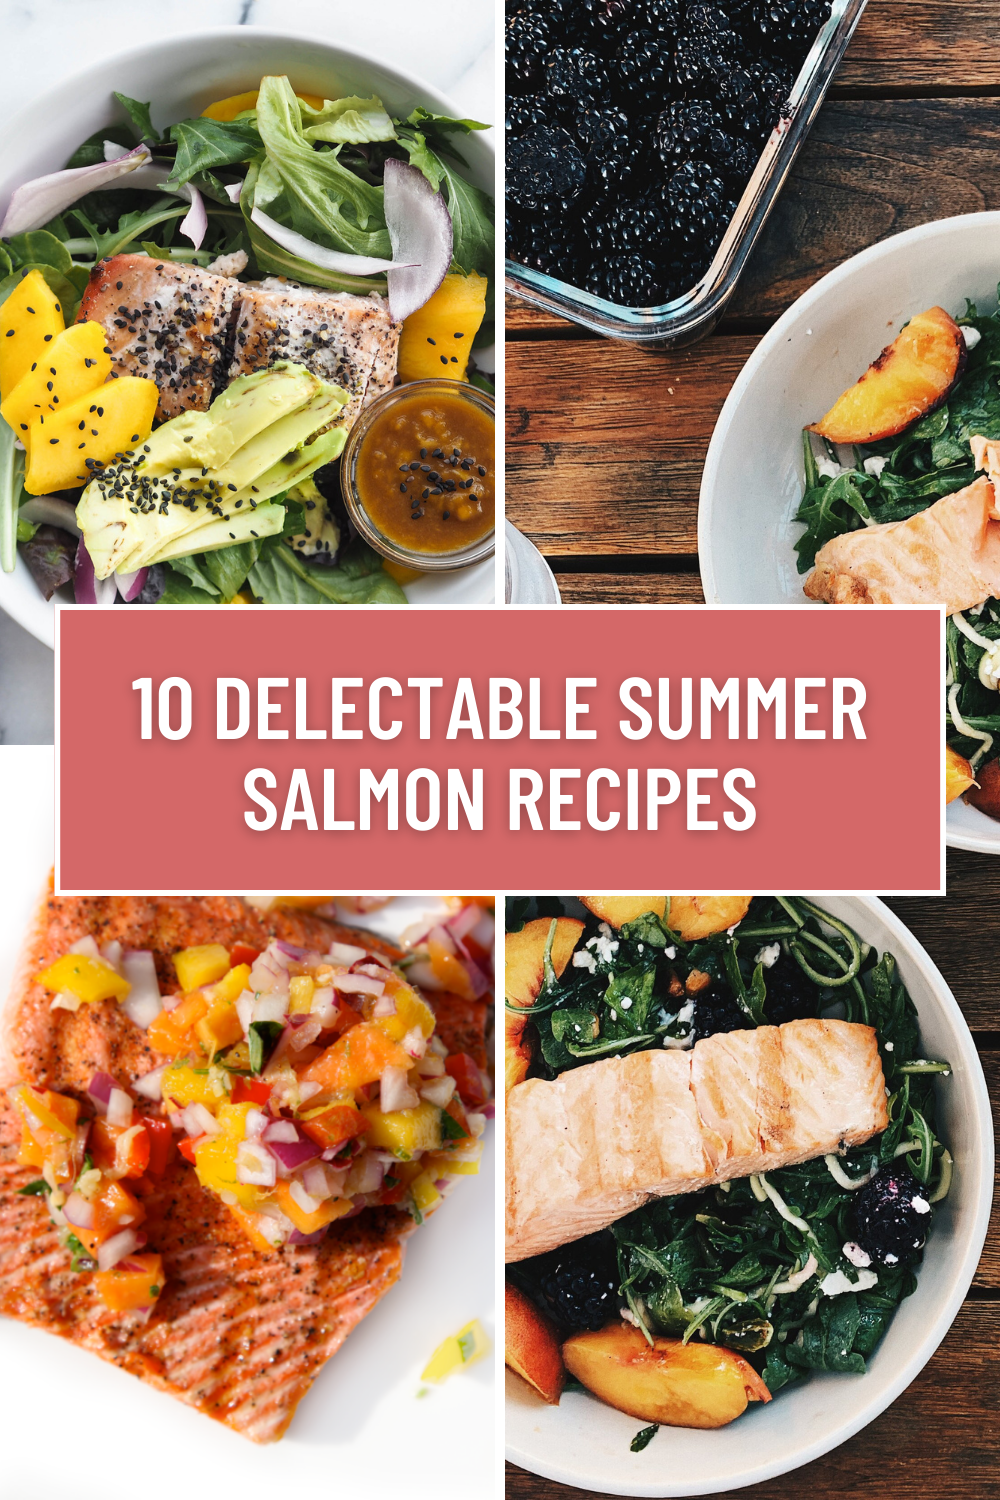 Summer Feasting 10 Mouthwatering Salmon Recipes to Try 3.png